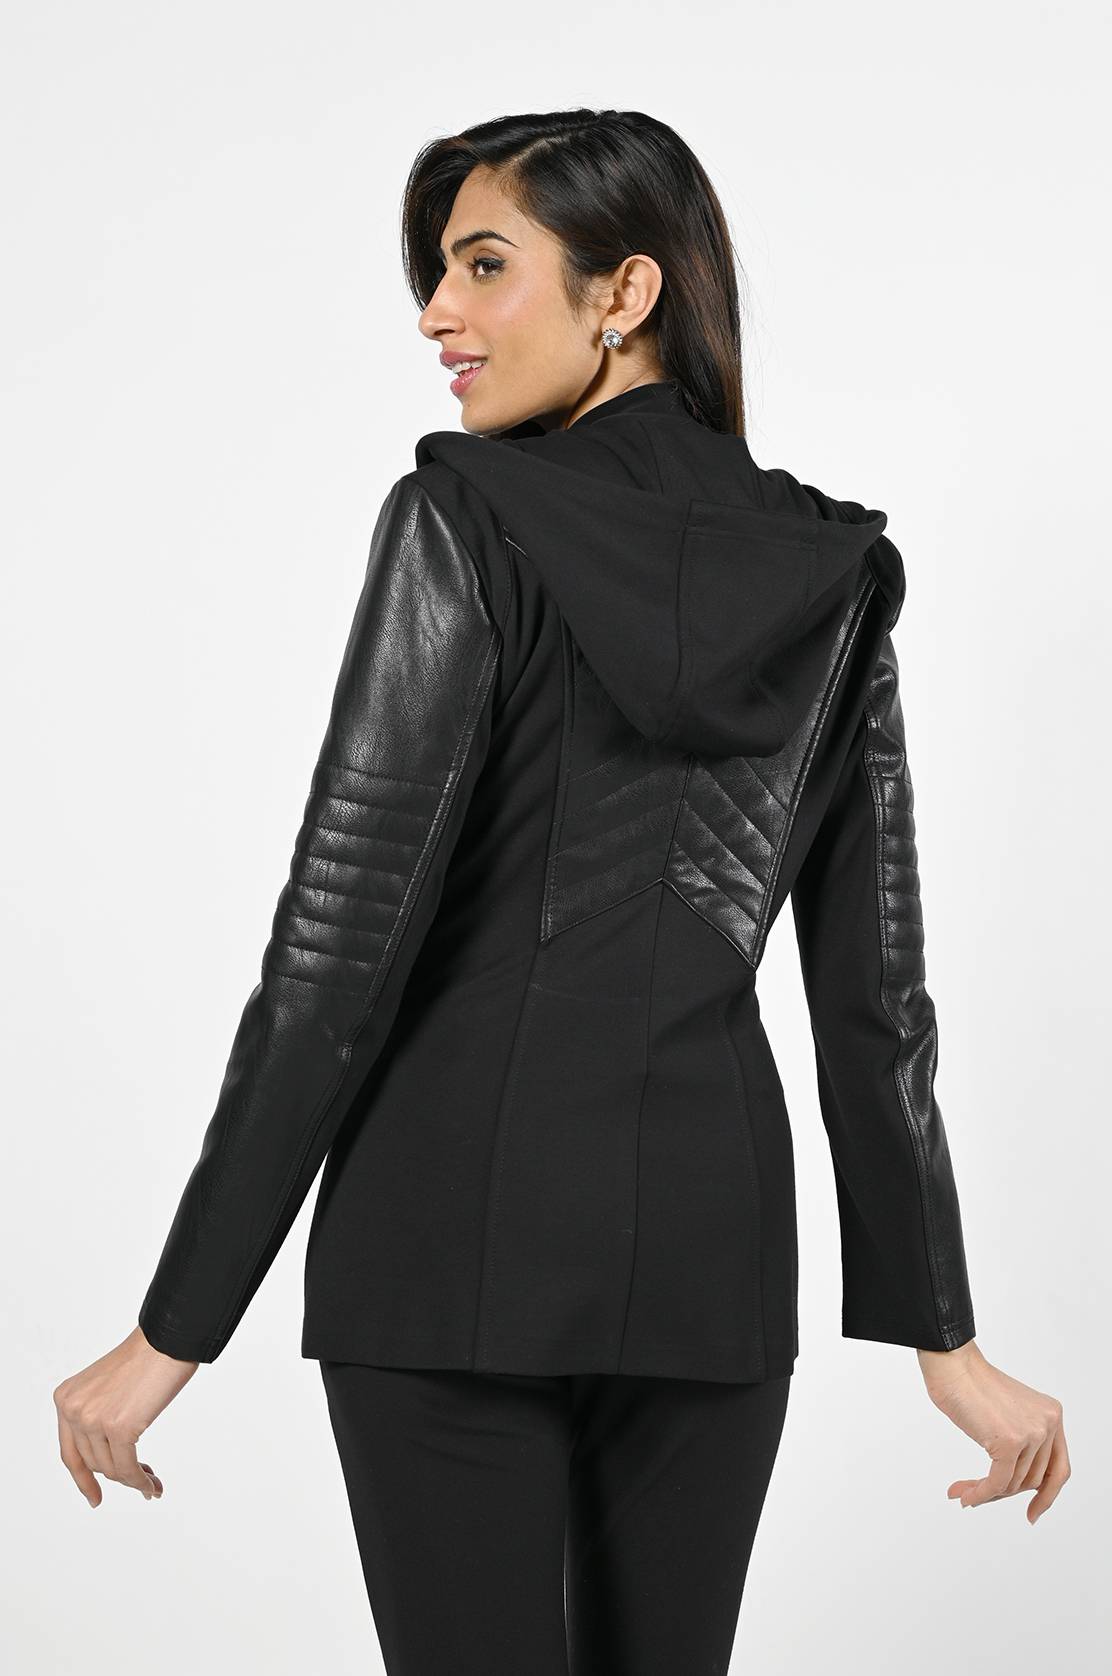 Hooded Blazer with Faux Leather Moto Details by Frank Lyman